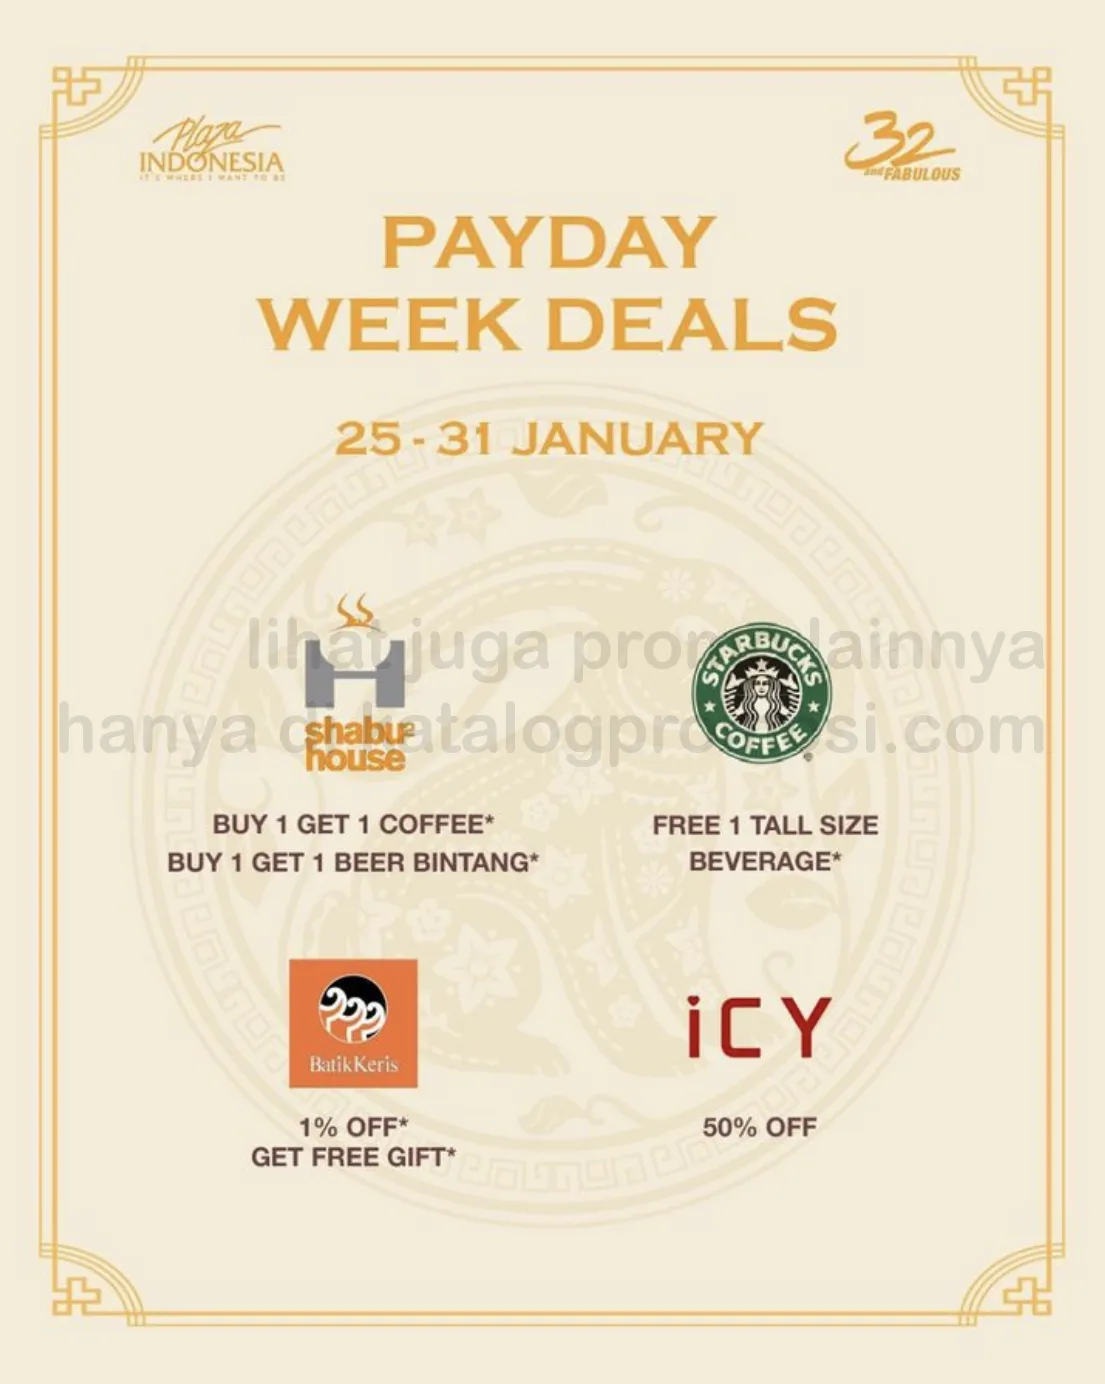 Promo PLAZA INDONESIA Payday Week Deals